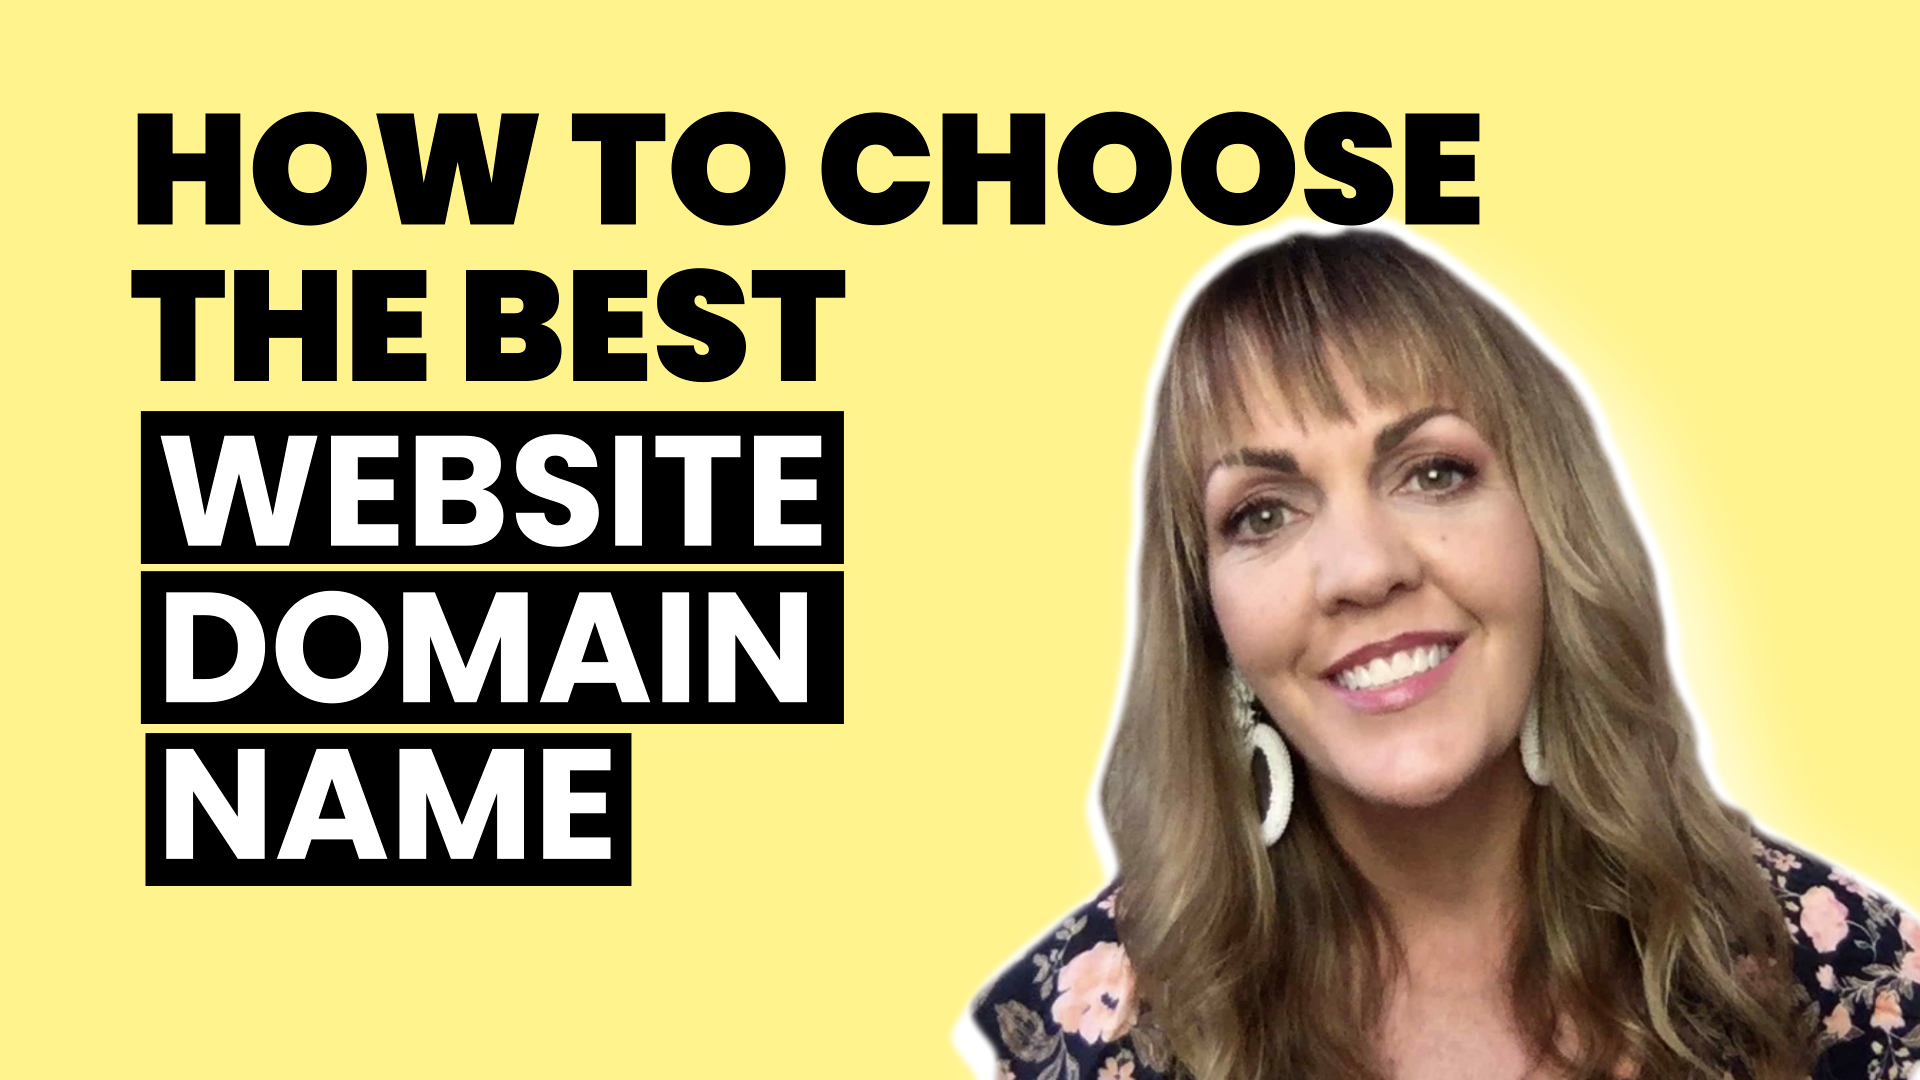 How to choose the best website domain name